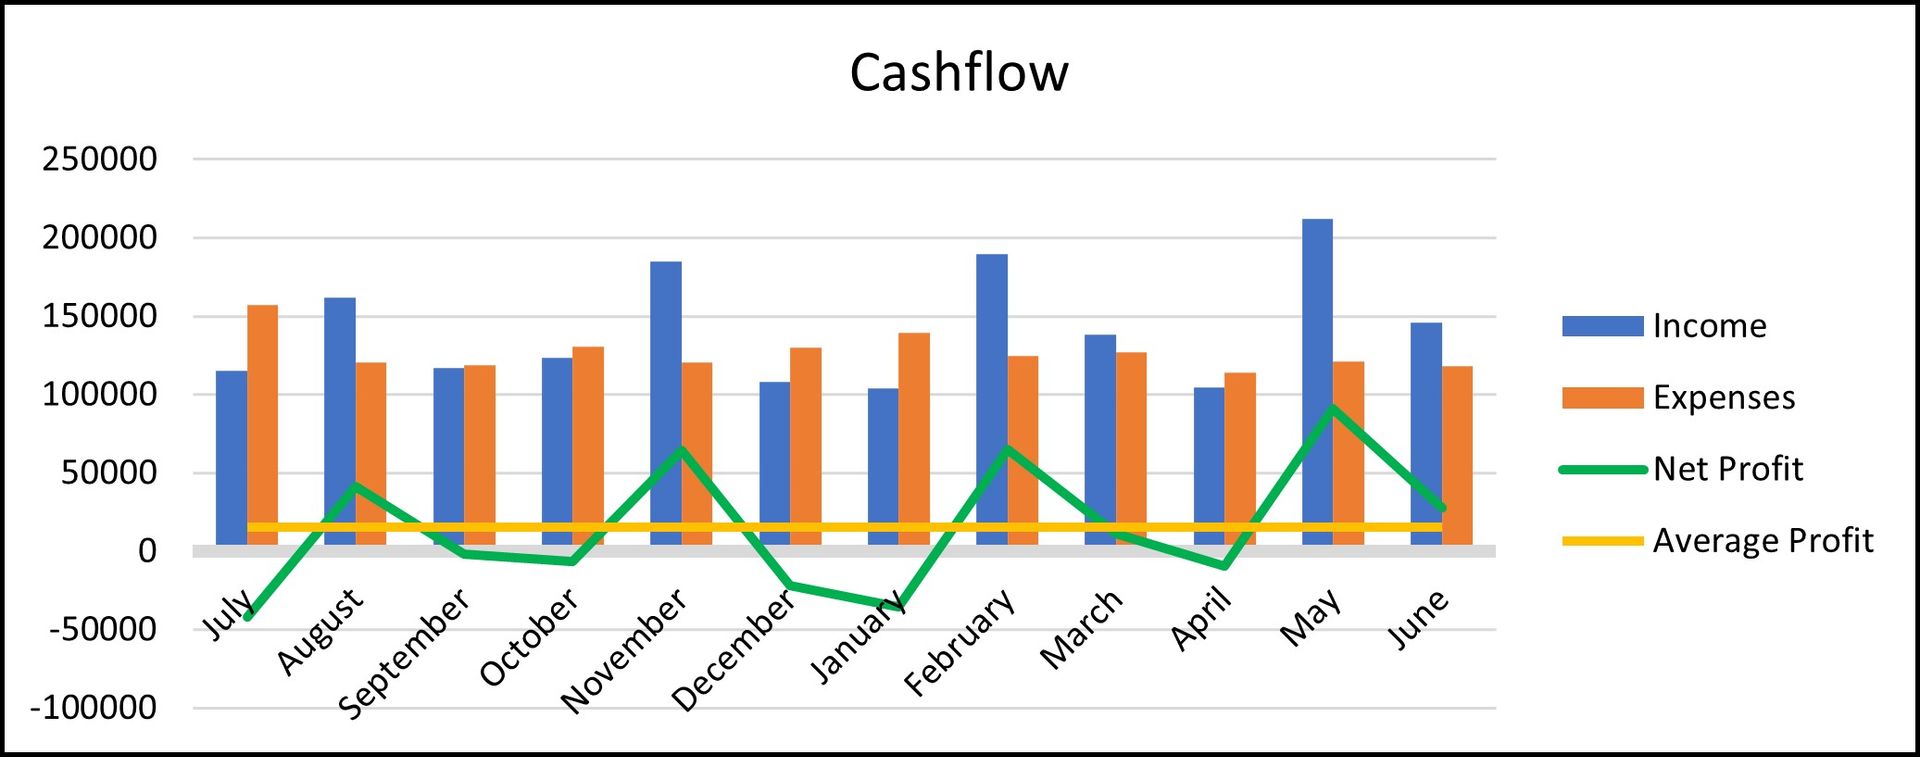 Example of a cashflow line graph, income, expenses, net profit and average profit over a financial year.